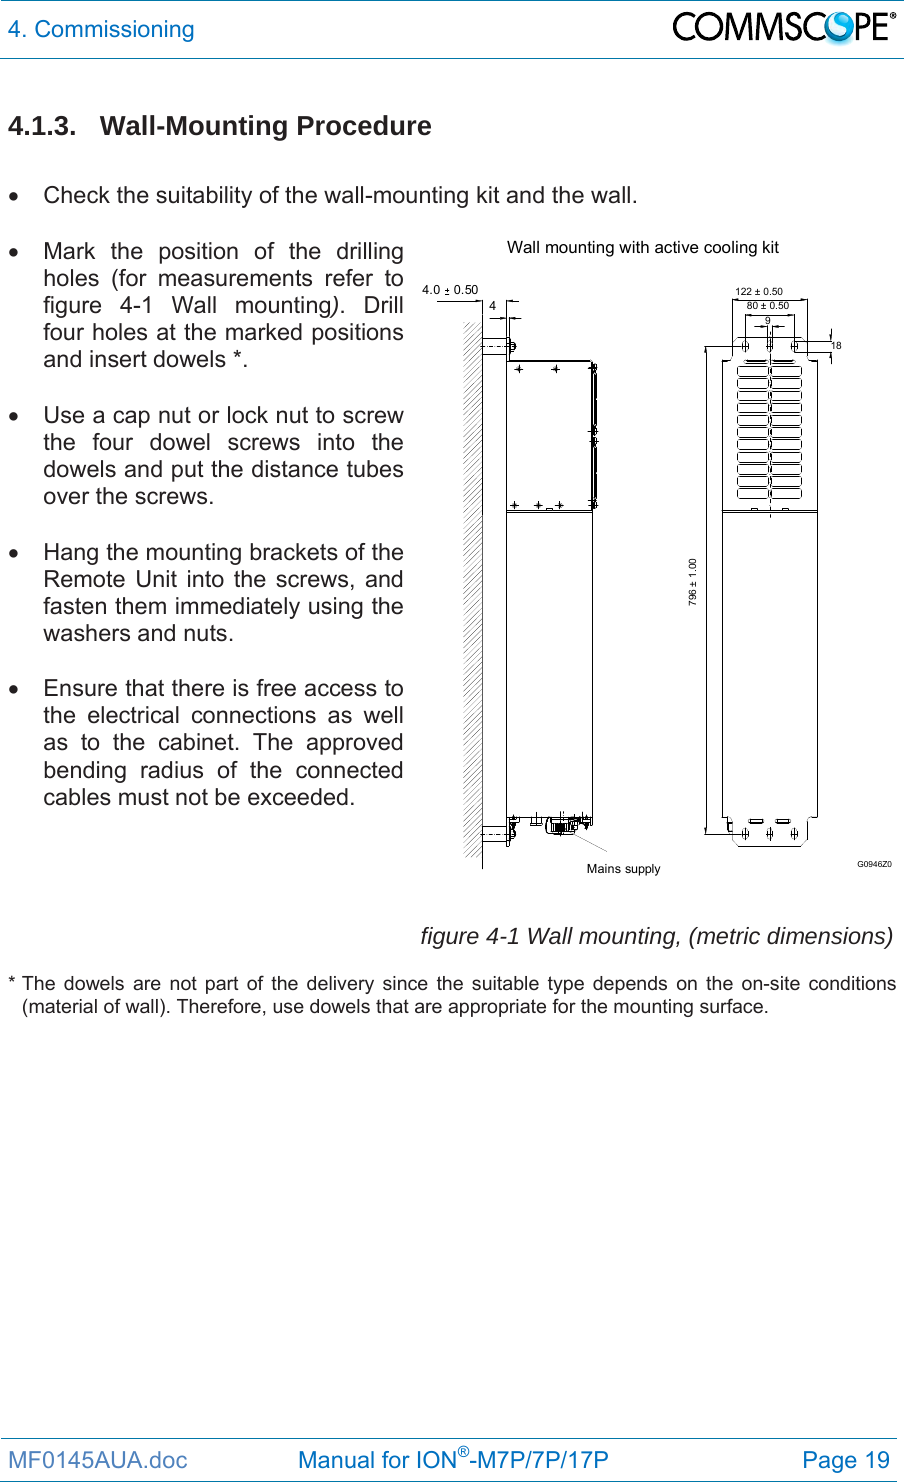 4. Commissioning  MF0145AUA.doc                 Manual for ION®-M7P/7P/17P Page 19 4.1.3. Wall-Mounting Procedure    Check the suitability of the wall-mounting kit and the wall.    Mark the position of the drilling holes (for measurements refer to figure 4-1 Wall mounting). Drill four holes at the marked positions and insert dowels *.    Use a cap nut or lock nut to screw the four dowel screws into the dowels and put the distance tubes over the screws.    Hang the mounting brackets of the Remote Unit into the screws, and fasten them immediately using the washers and nuts.    Ensure that there is free access to the electrical connections as well as to the cabinet. The approved bending radius of the connected cables must not be exceeded.   Wall mounting with active cooling kit4.0  0.504Mains supply980 ± 0.50122 ± 0.5018796 ± 1.00G0946Z0 figure 4-1 Wall mounting, (metric dimensions)* The dowels are not part of the delivery since the suitable type depends on the on-site conditions (material of wall). Therefore, use dowels that are appropriate for the mounting surface.   